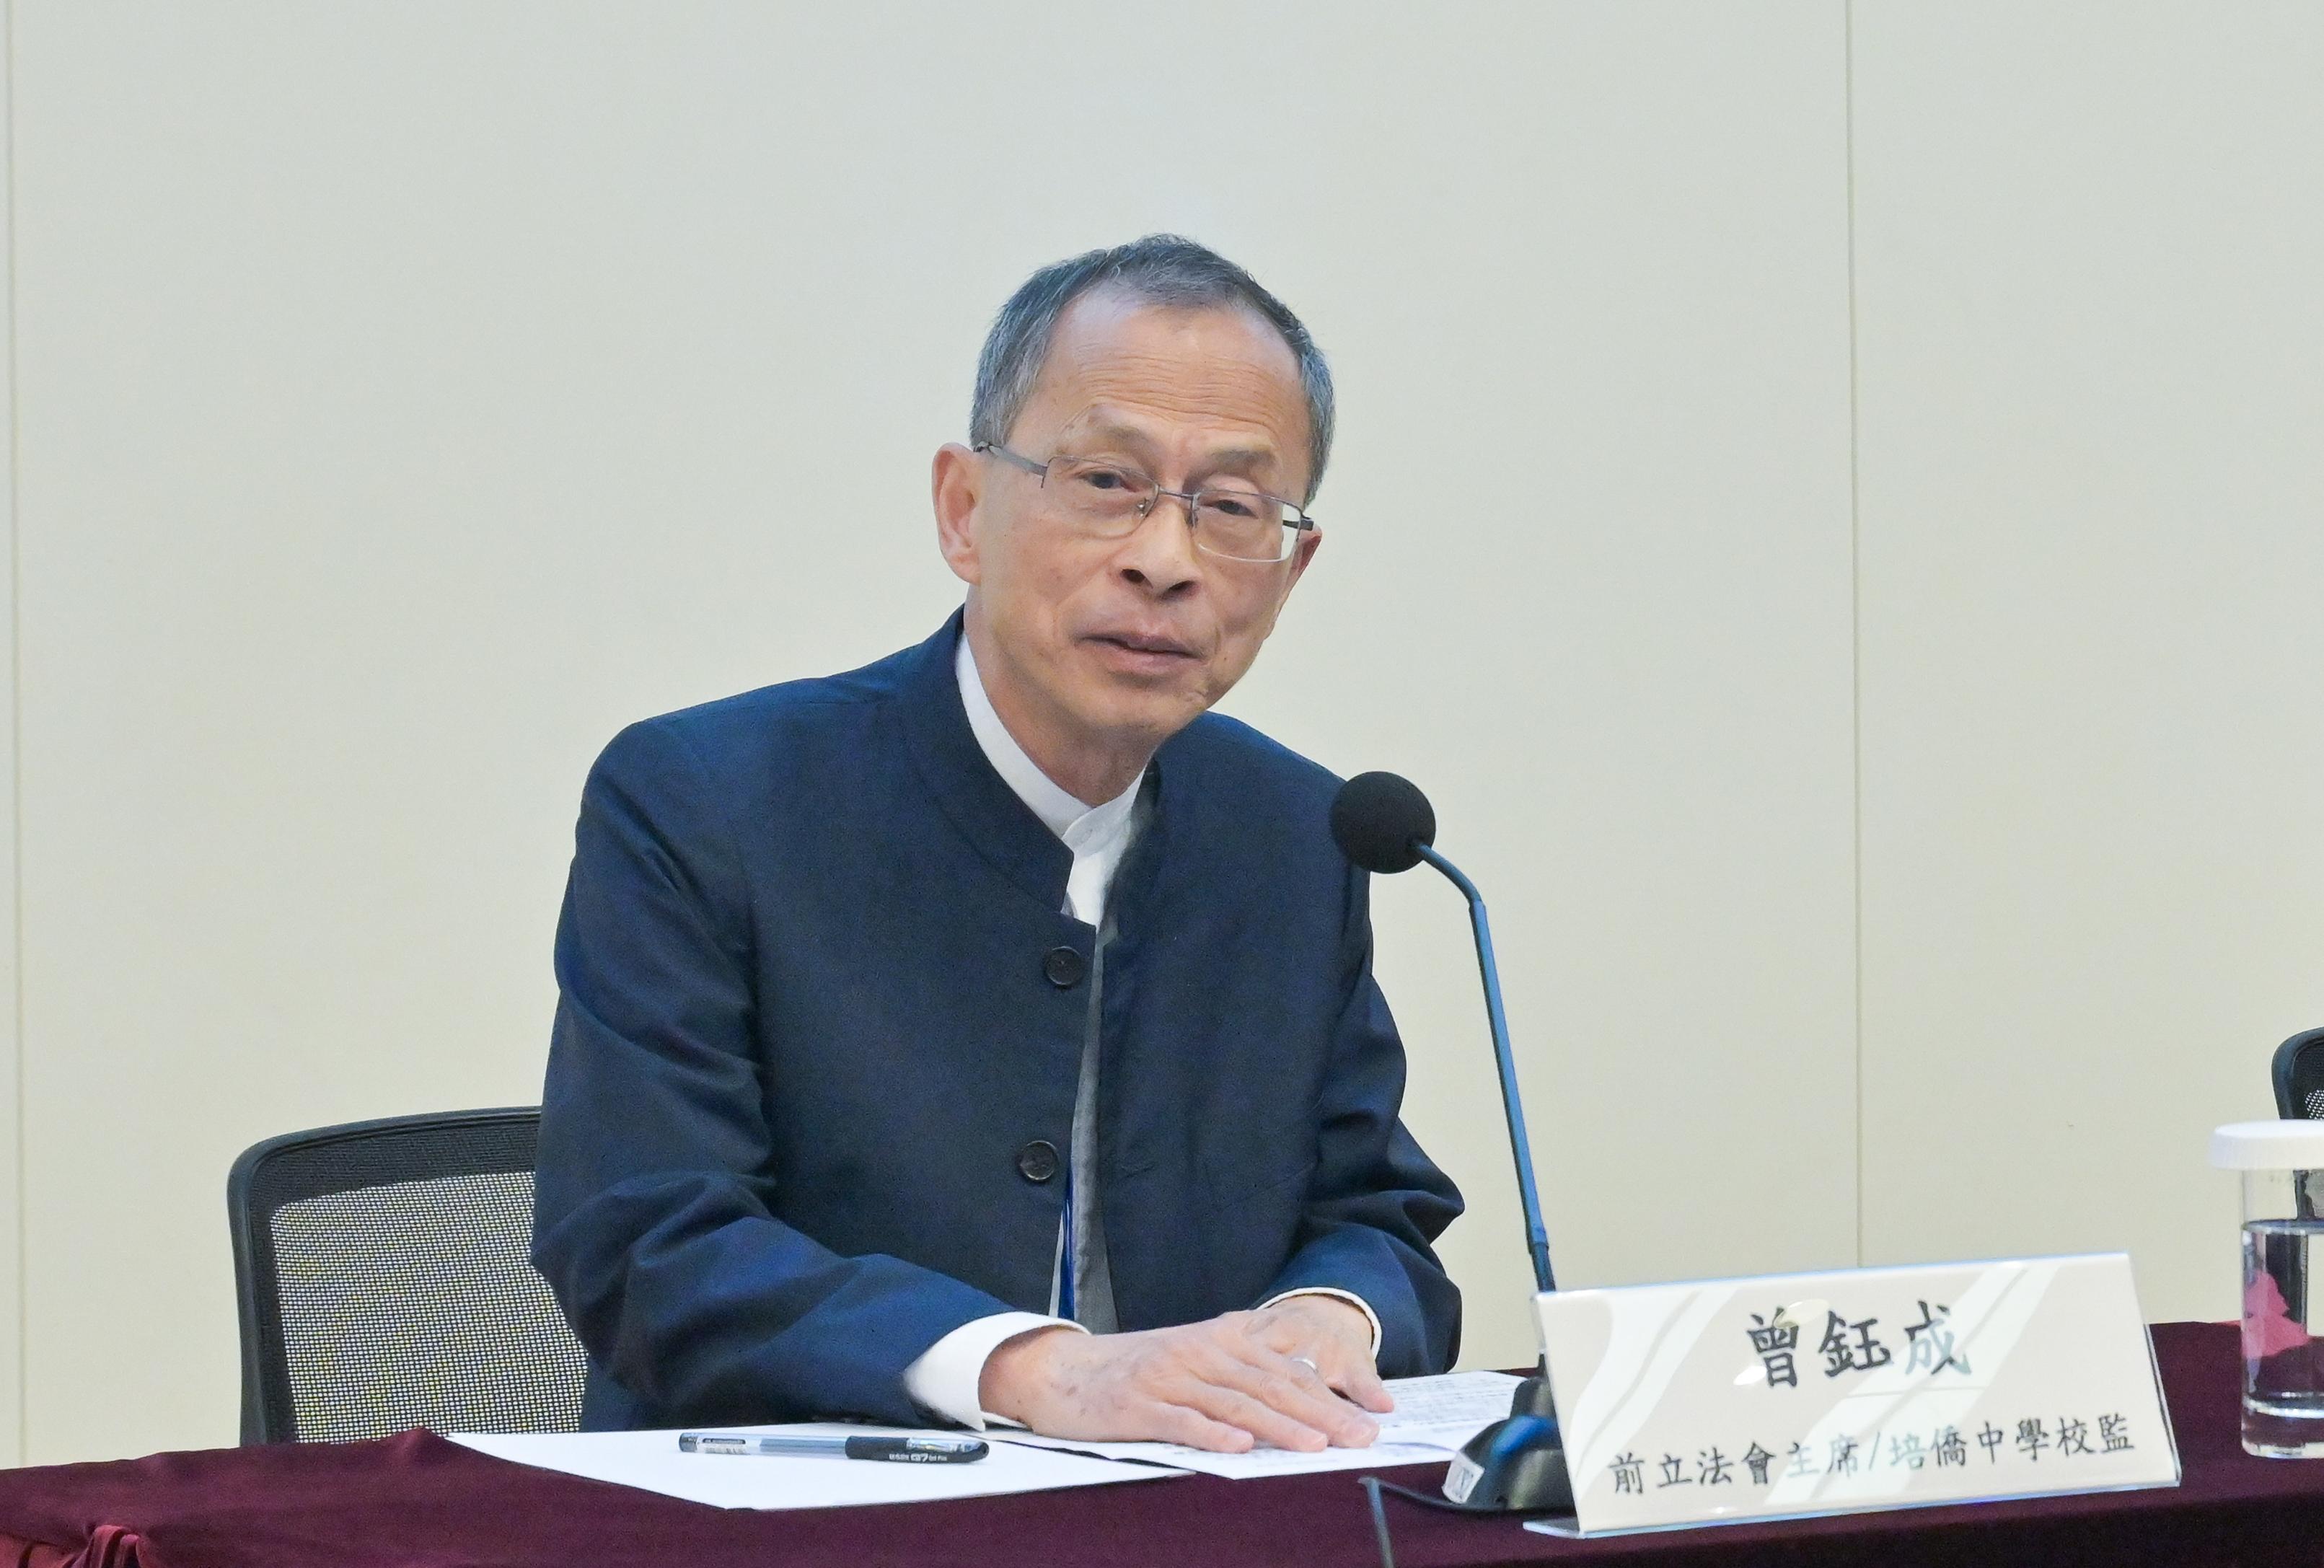 The Government of the Hong Kong Special Administrative Region today (August 11) held a sharing session on the "Important spirit of President Xi Jinping's reply letter to Hong Kong students" at the Central Government Offices. Photo shows the supervisor of Pui Kiu Middle School, Mr Jasper Tsang, speaking at the sharing session.